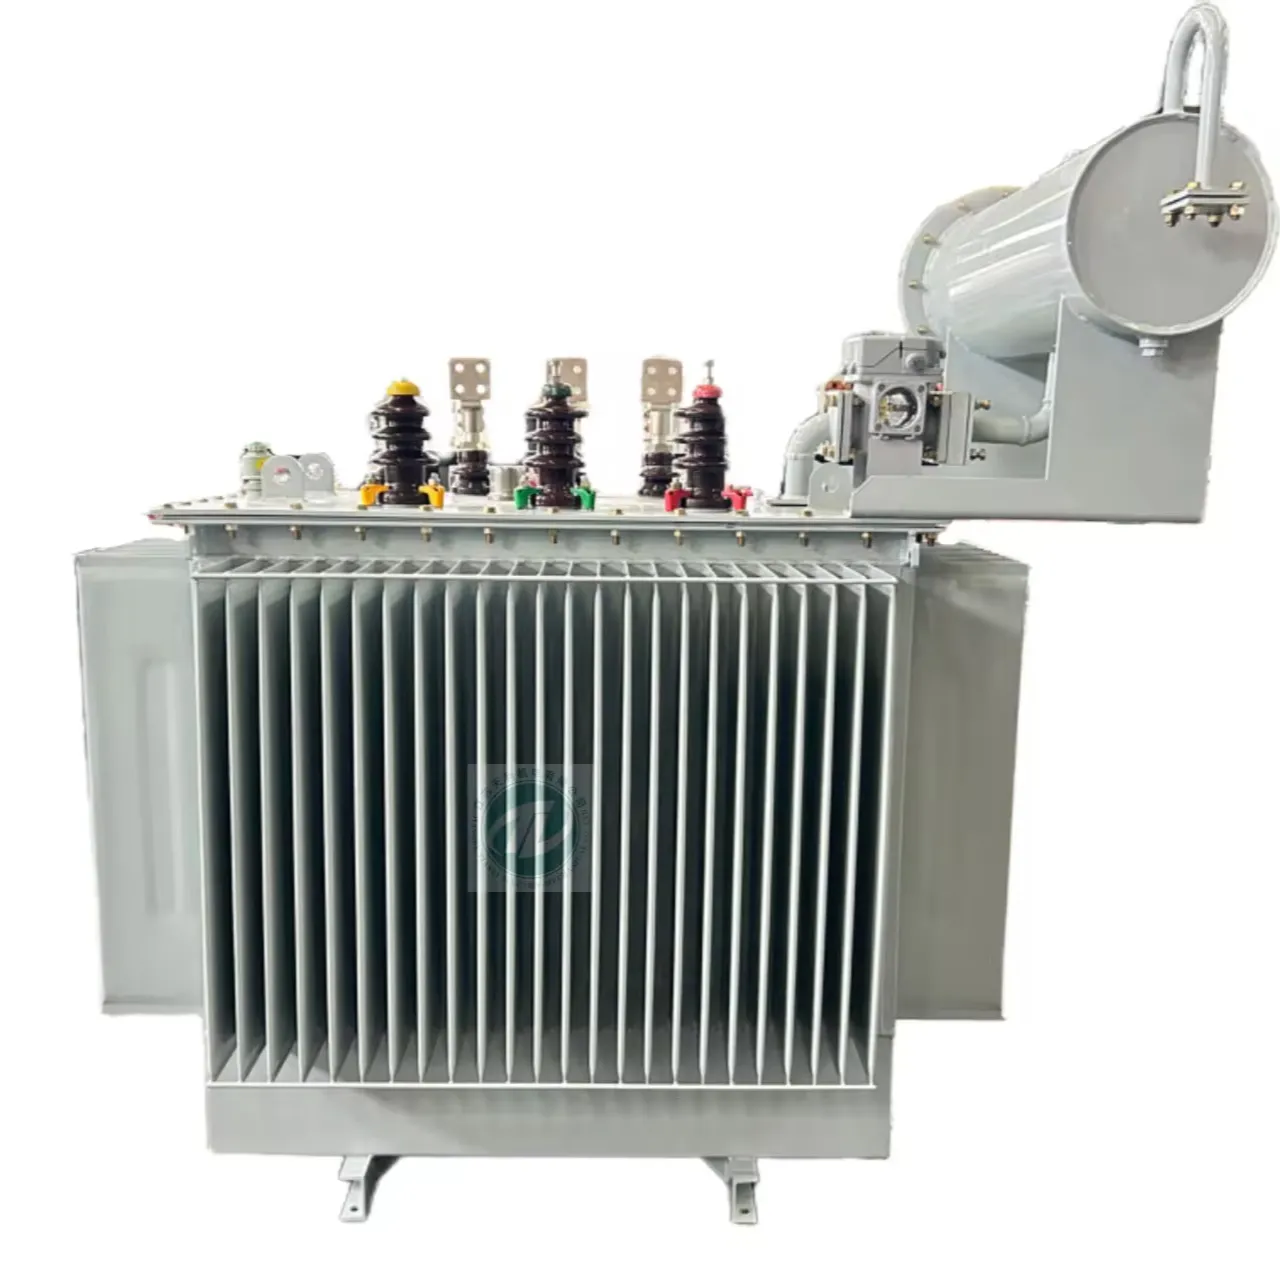 power transformer electrical equipment inverter electrical transformer 1250KVA Energy saving mv hv transformers for factory